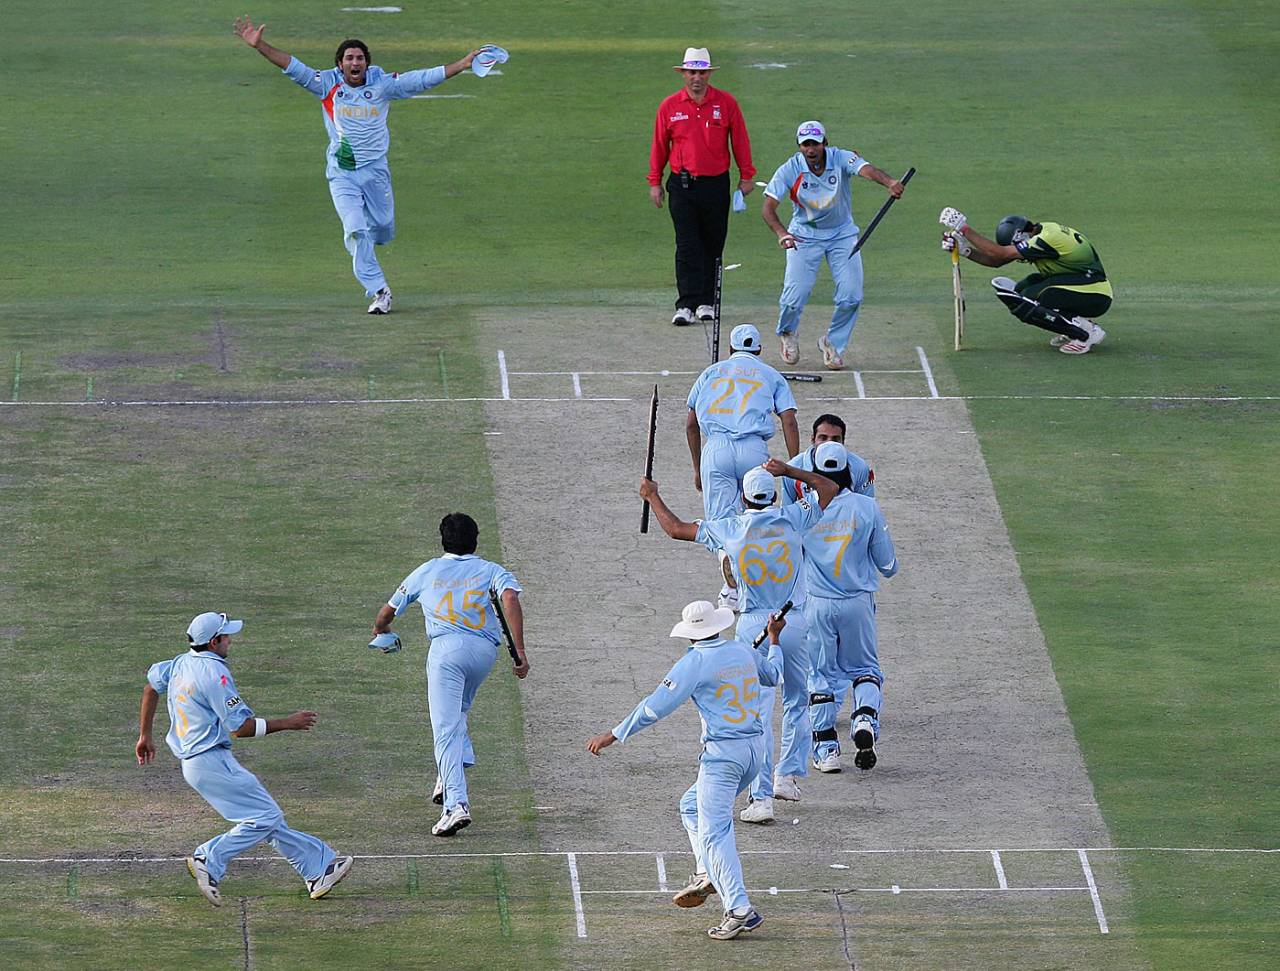 The winning moment - Misbah-ul-Haq rues his luck as the Indians celebrate, India v Pakistan, ICC World Twenty20 final, Johannesburg, September 24, 2007